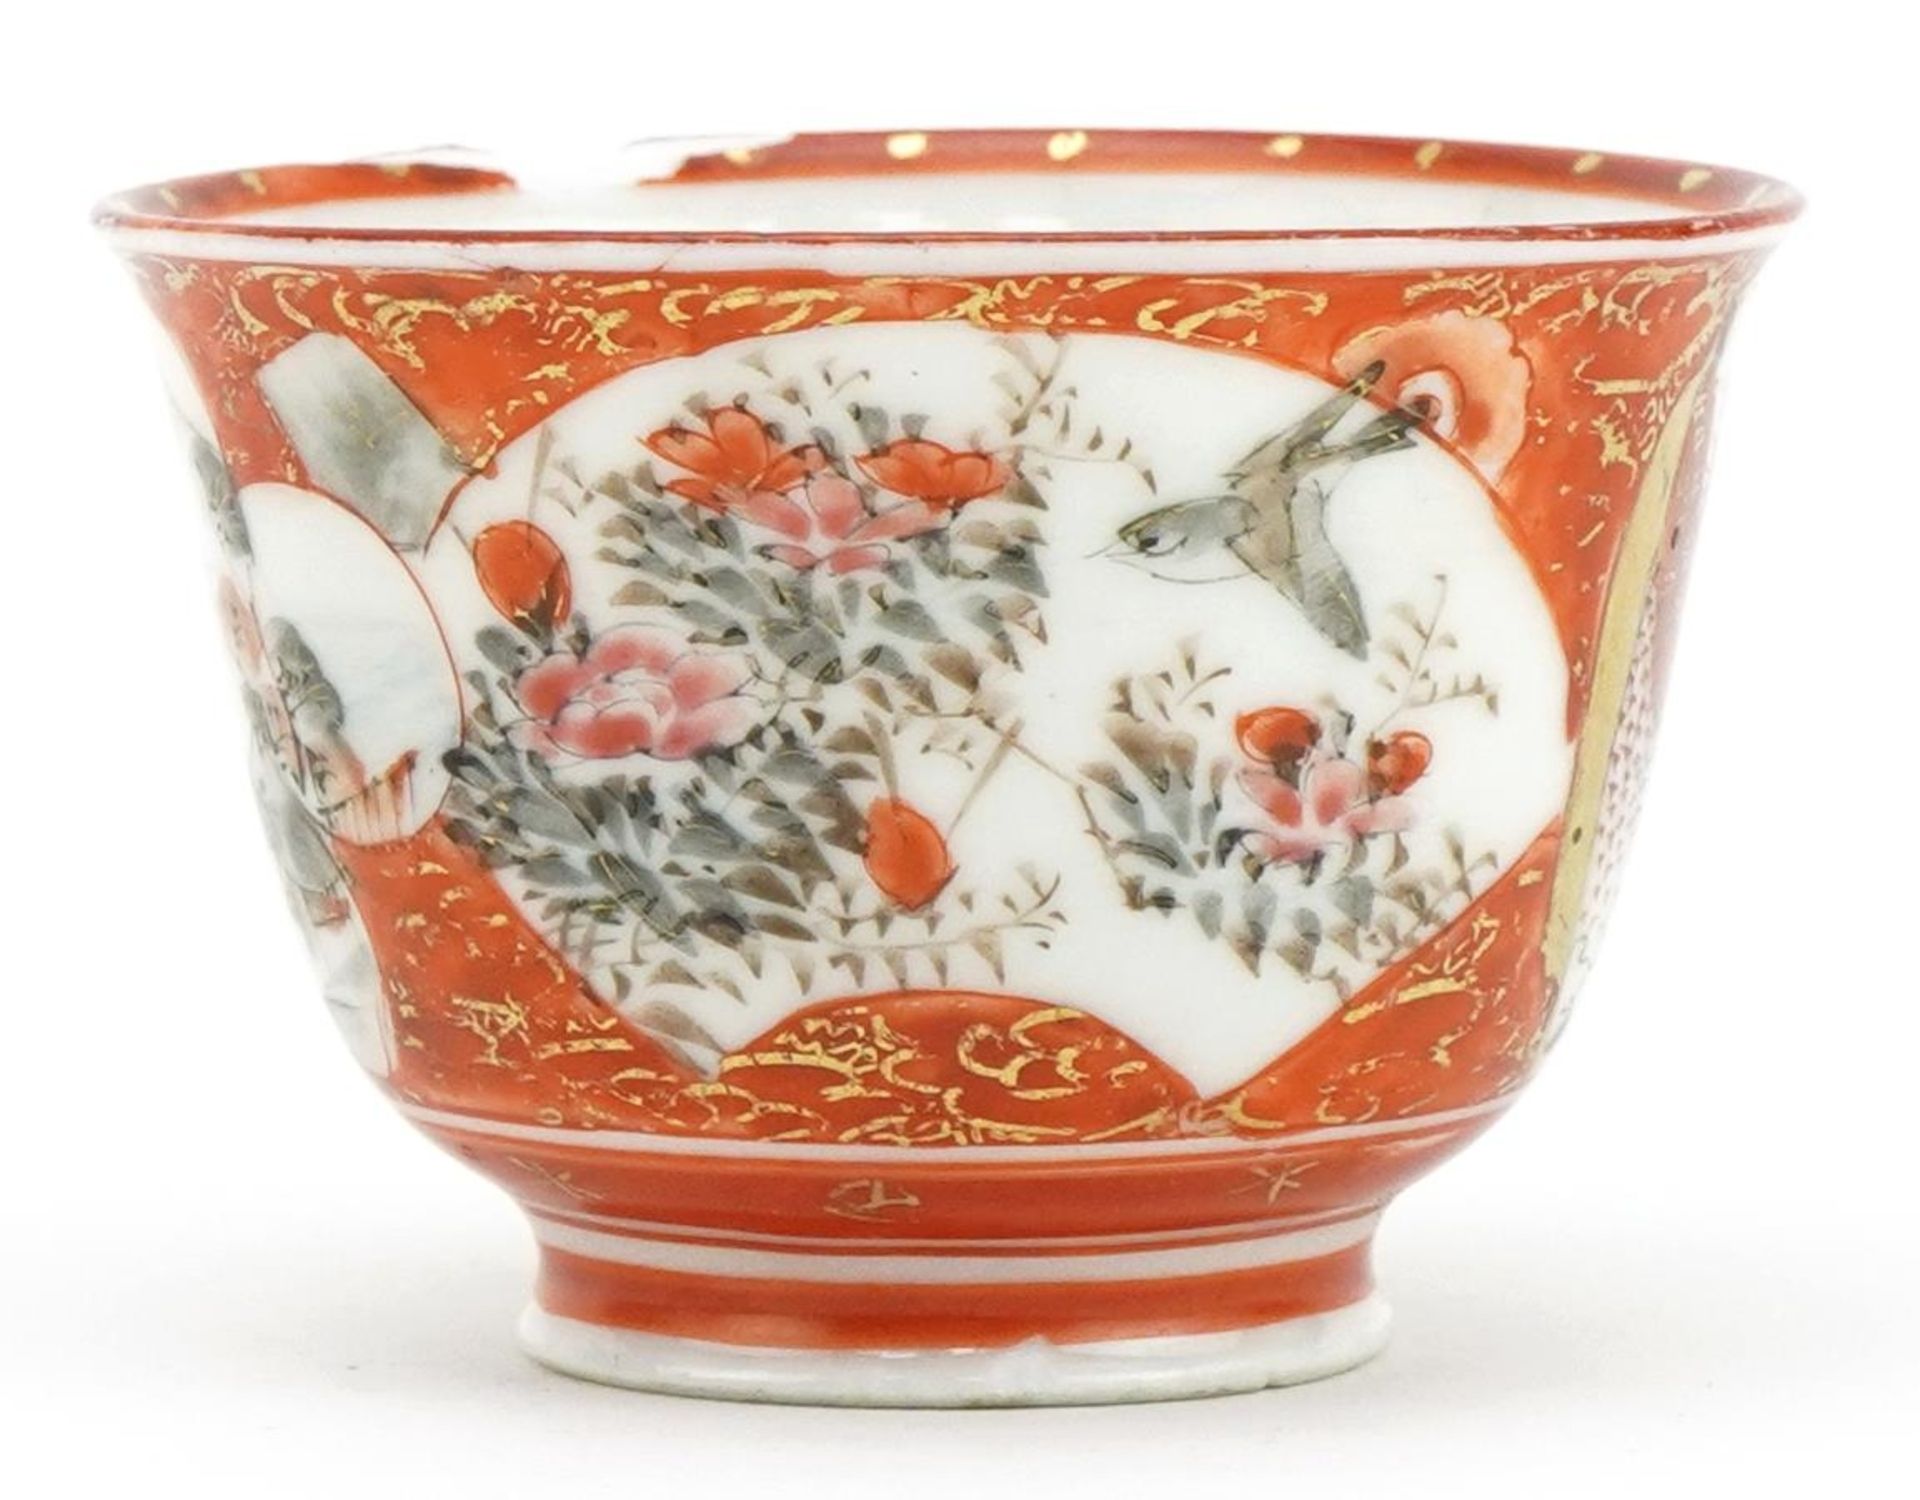 Japanese Kutani porcelain tea bowl with saucer hand painted with figures and flowers, the largest - Image 4 of 8